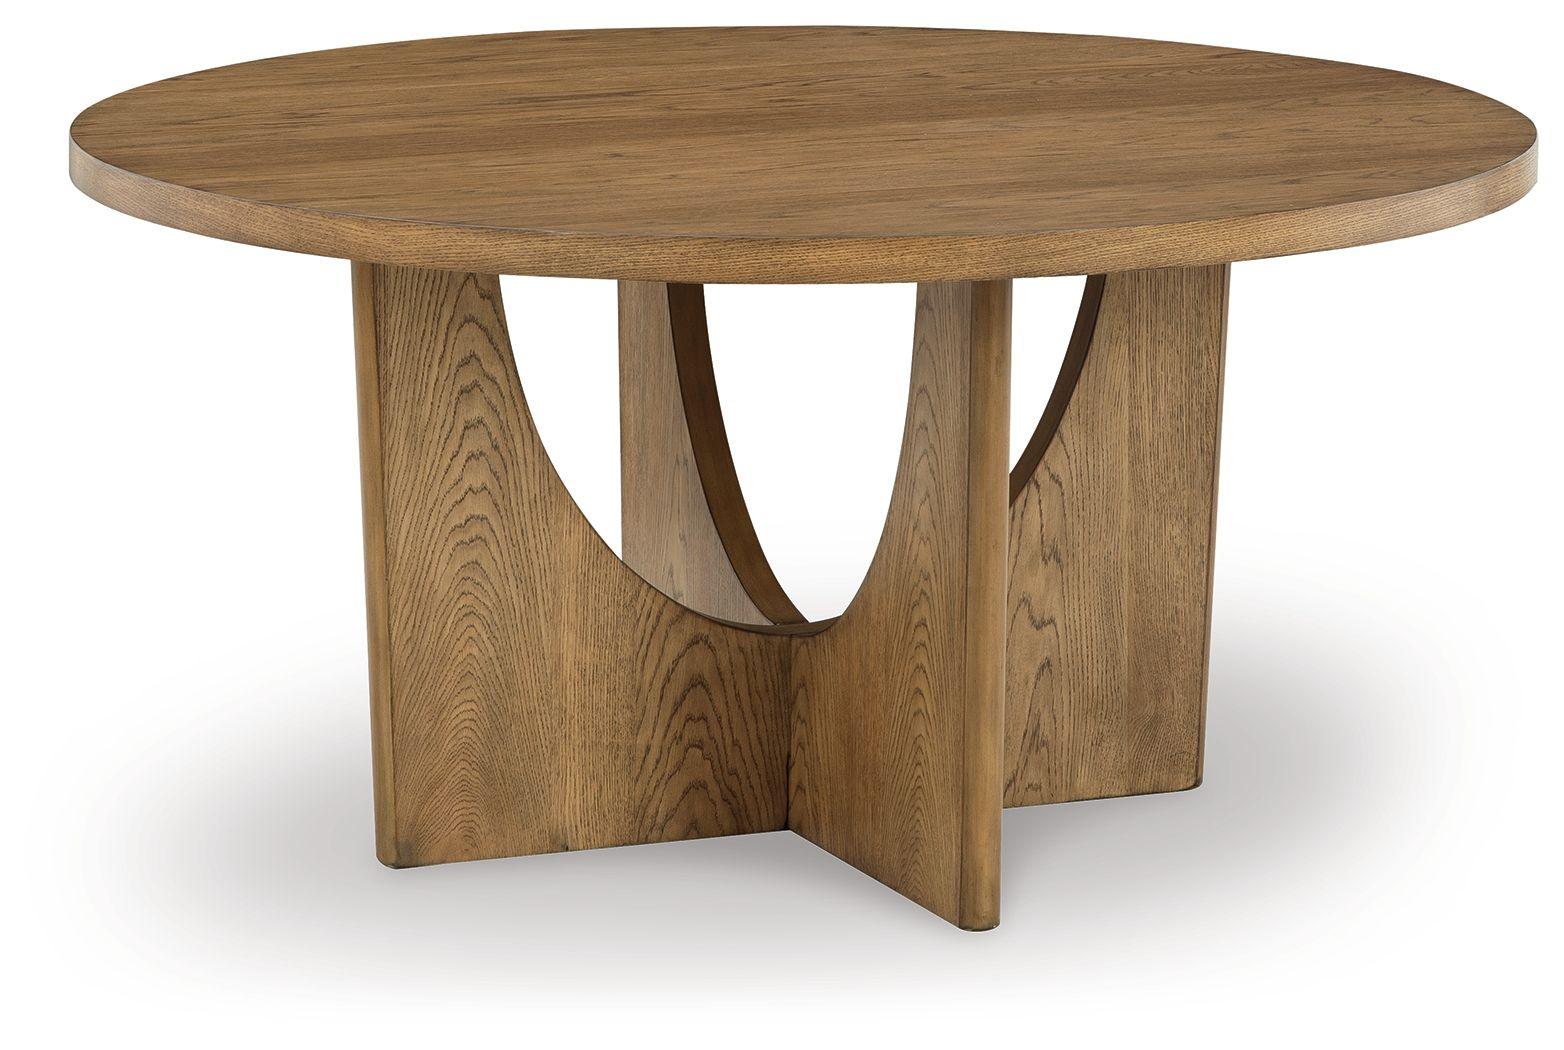 Signature Design by Ashley® - Dakmore - Brown - Round Dining Room Table - 5th Avenue Furniture